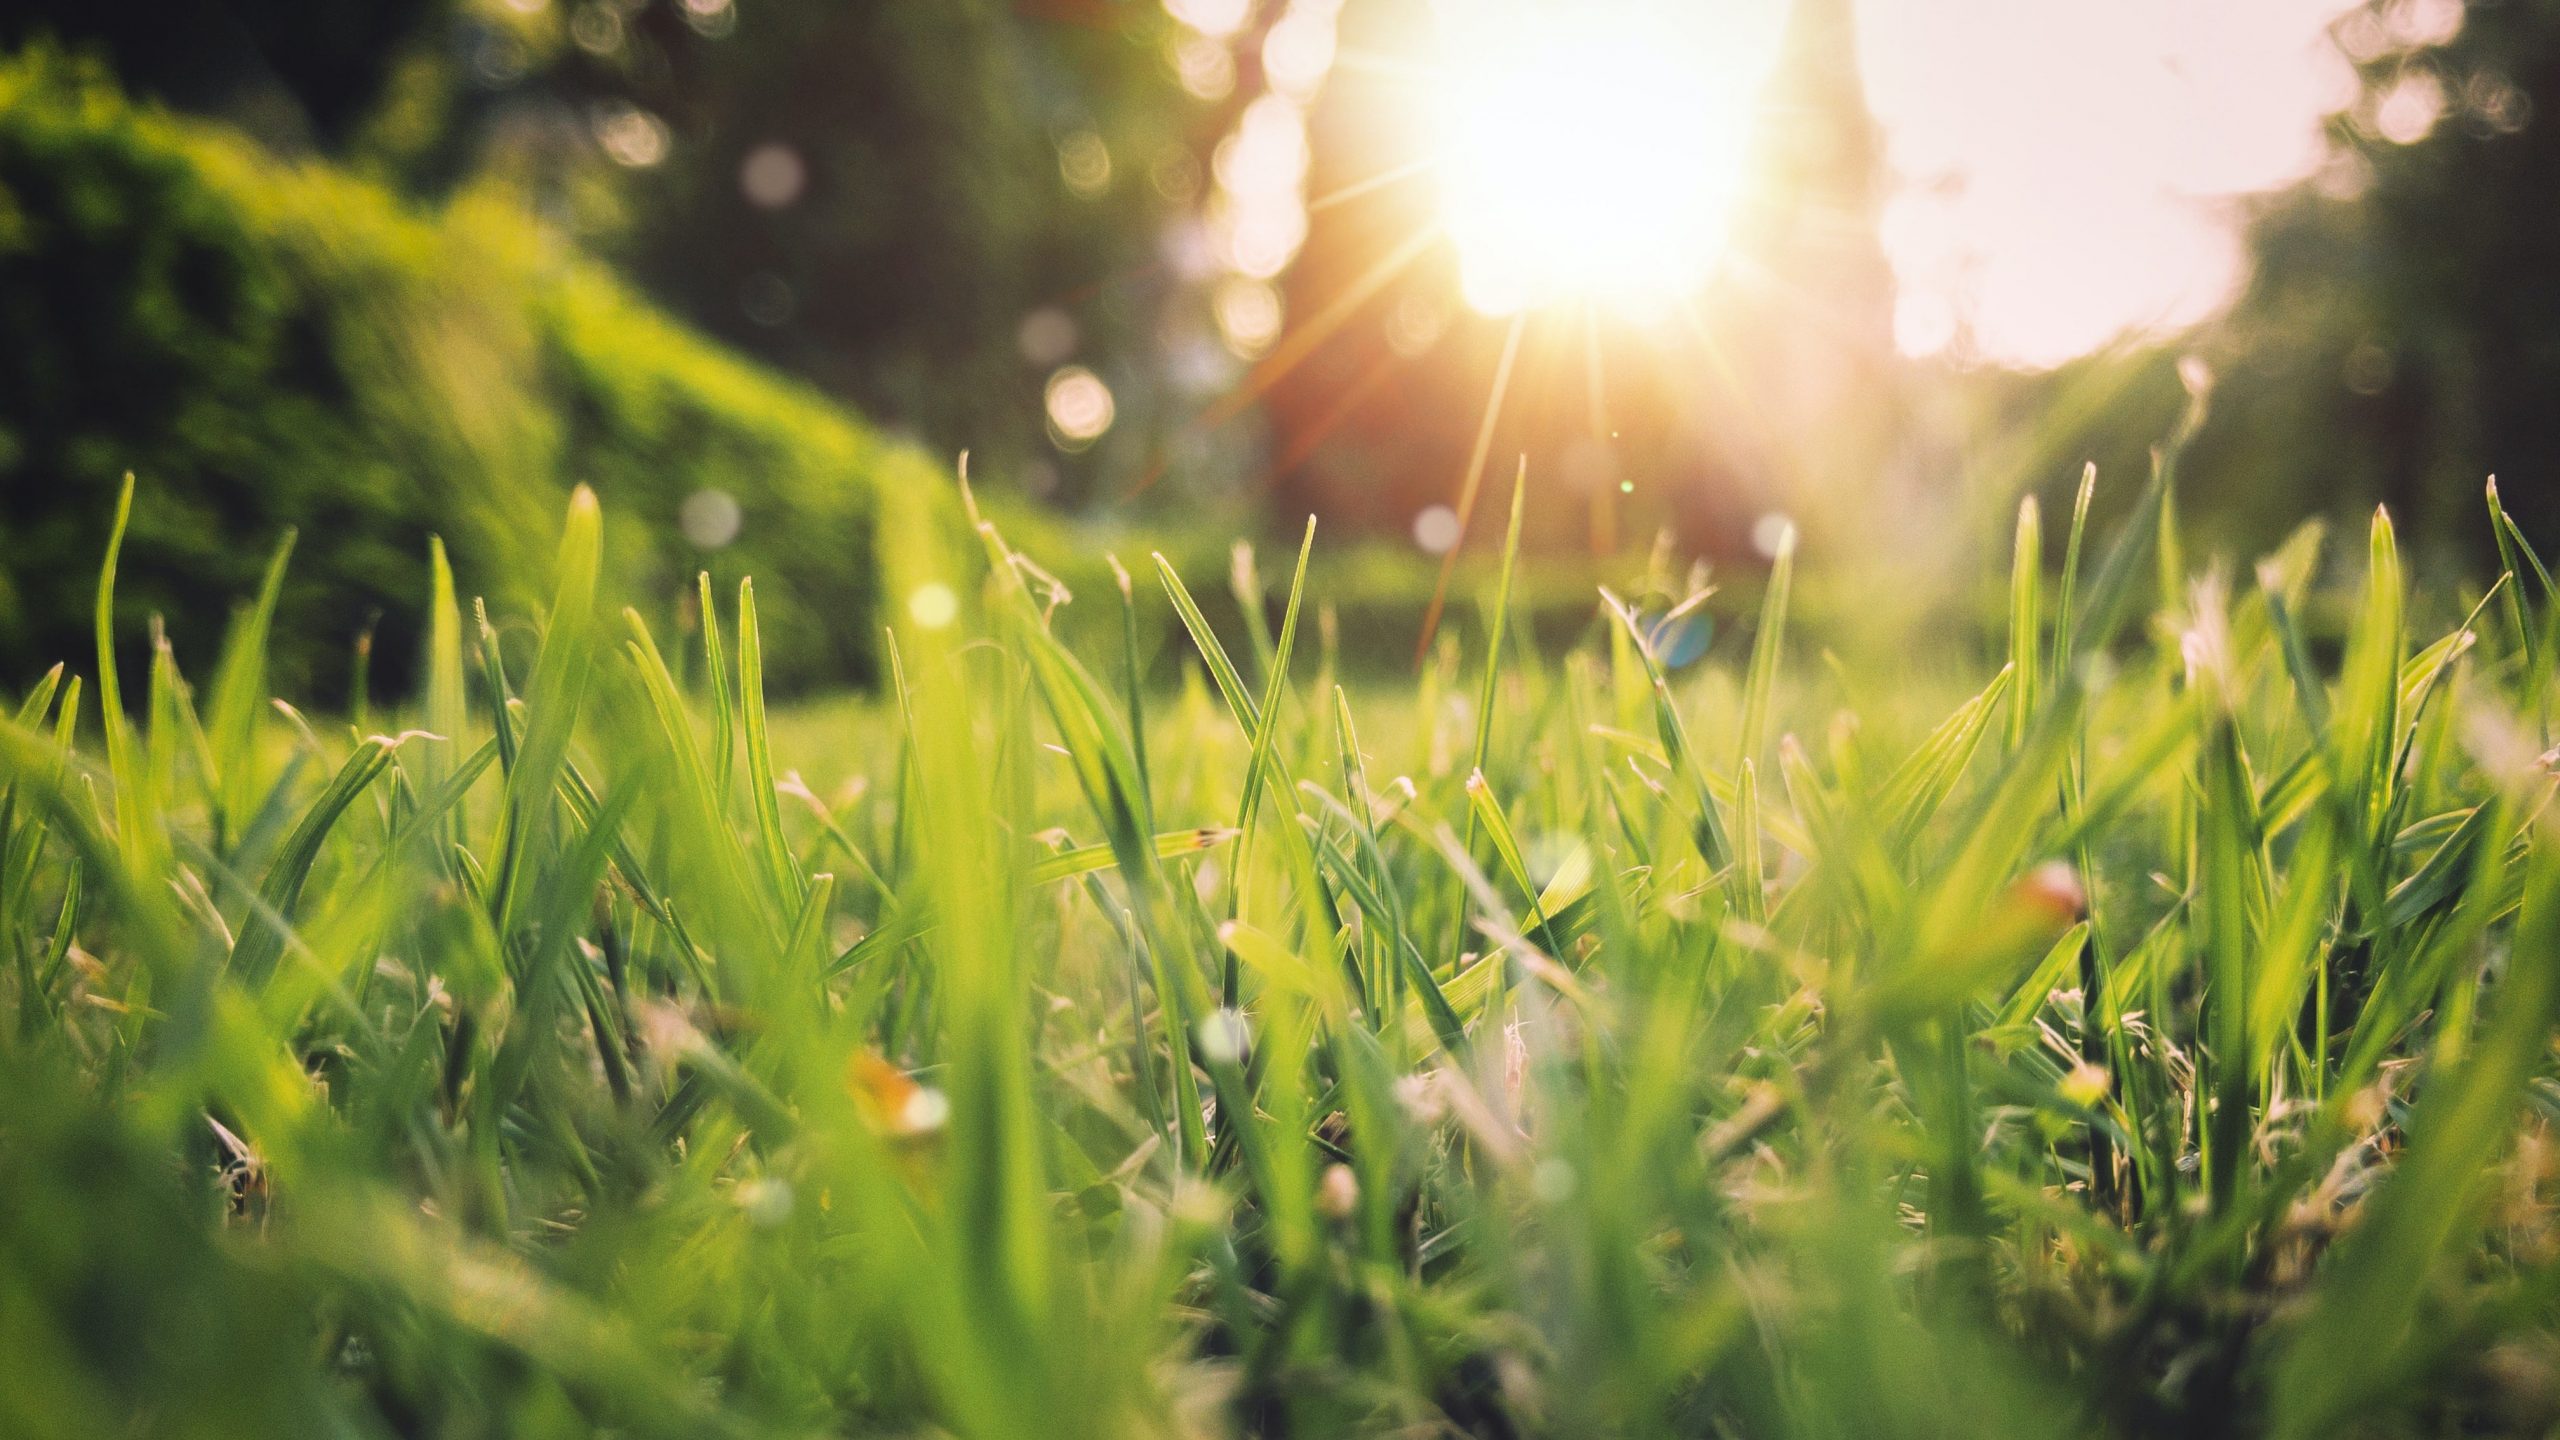 Sun shining on grass in the spring.